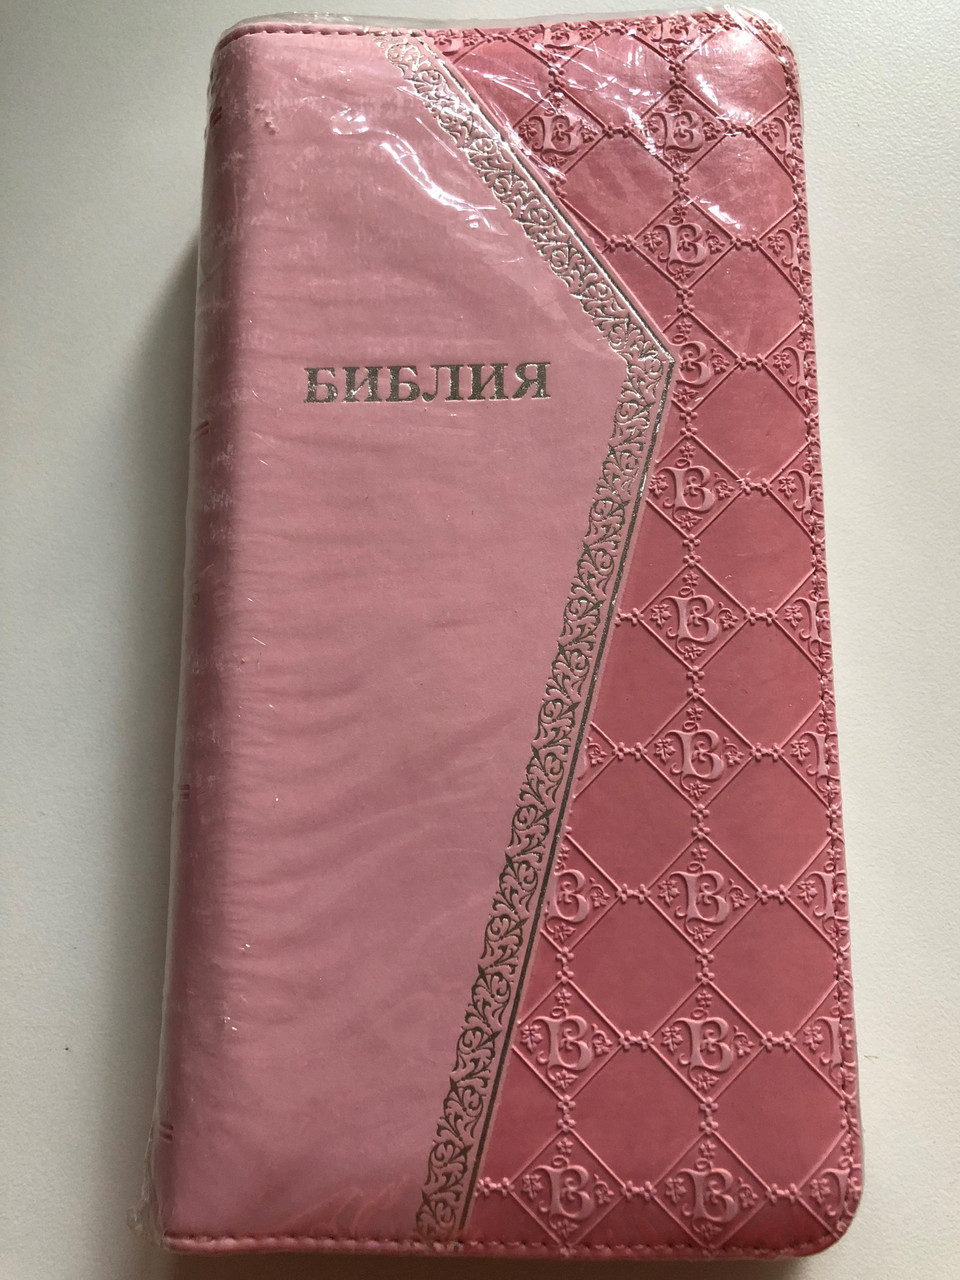 https://cdn10.bigcommerce.com/s-62bdpkt7pb/products/51414/images/261769/Russian_Pink_Holy_Bible_1__39979.1671717801.1280.1280.JPG?c=2